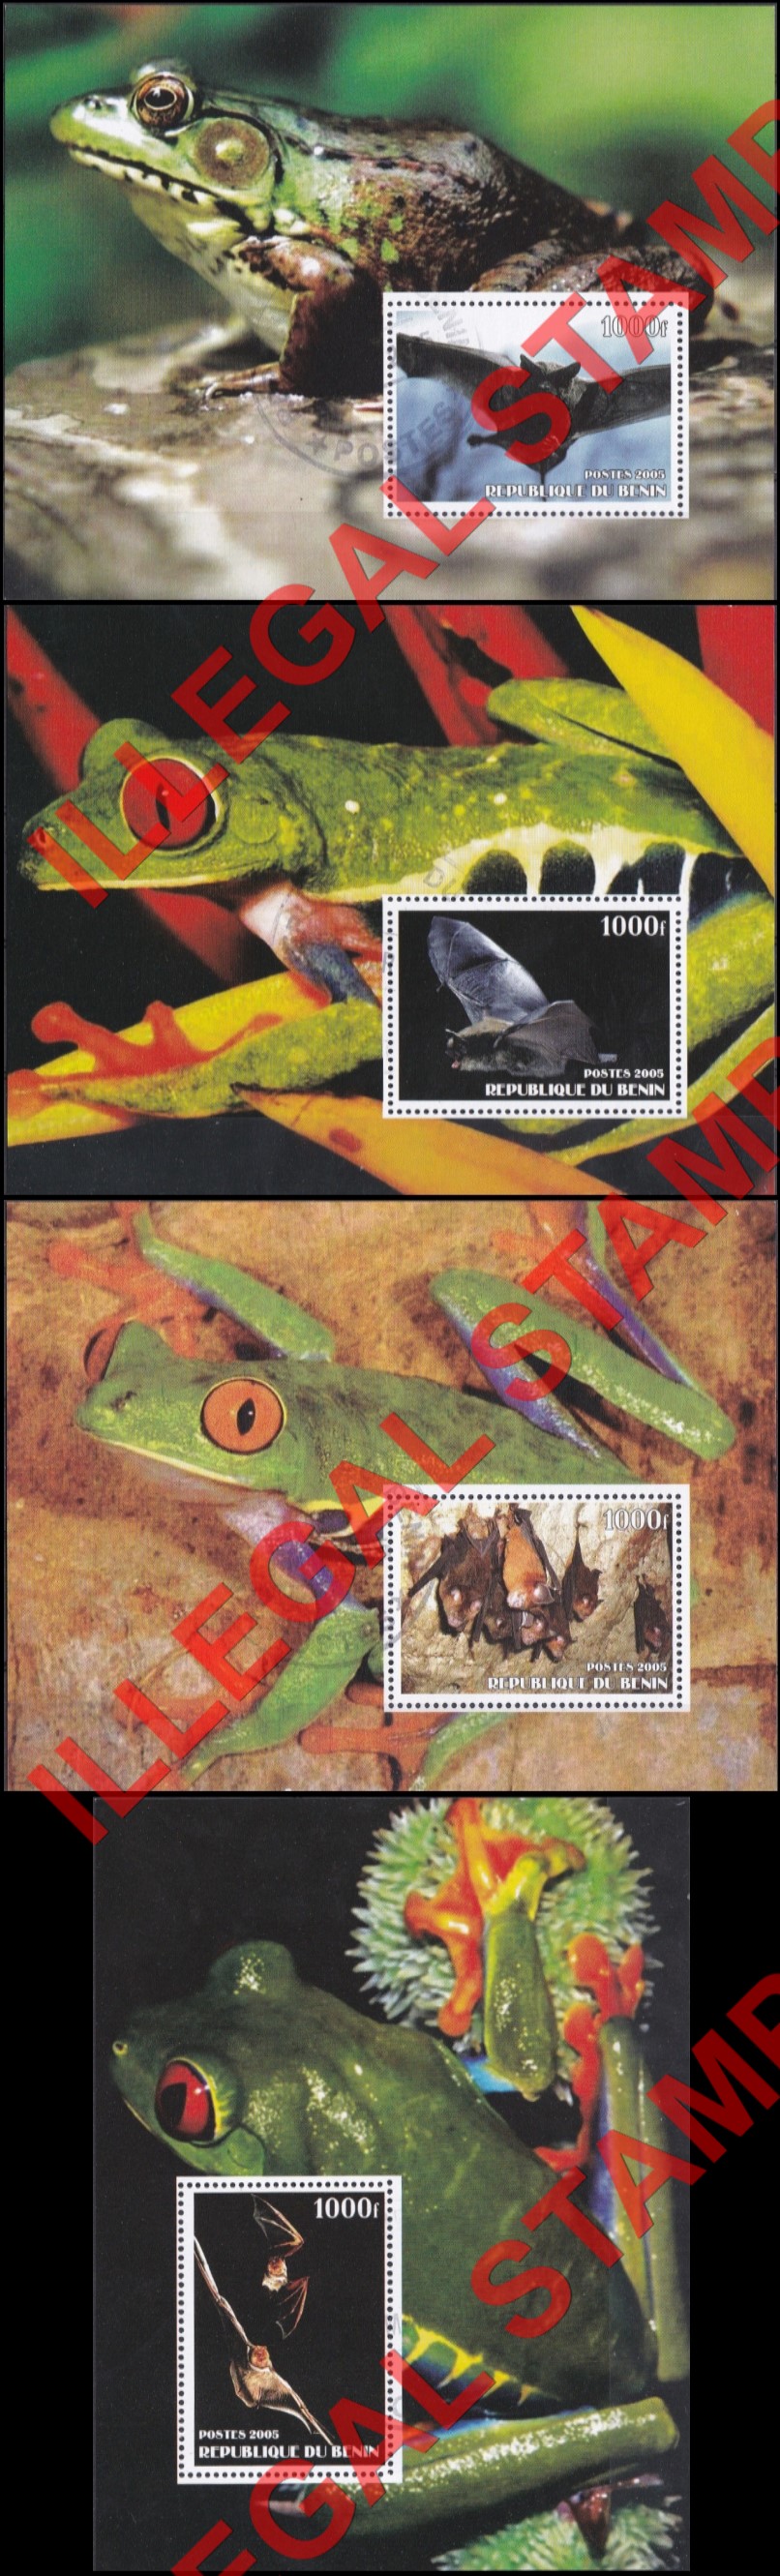 Benin 2005 Frogs and Bats Illegal Stamp Souvenir Sheets of 1